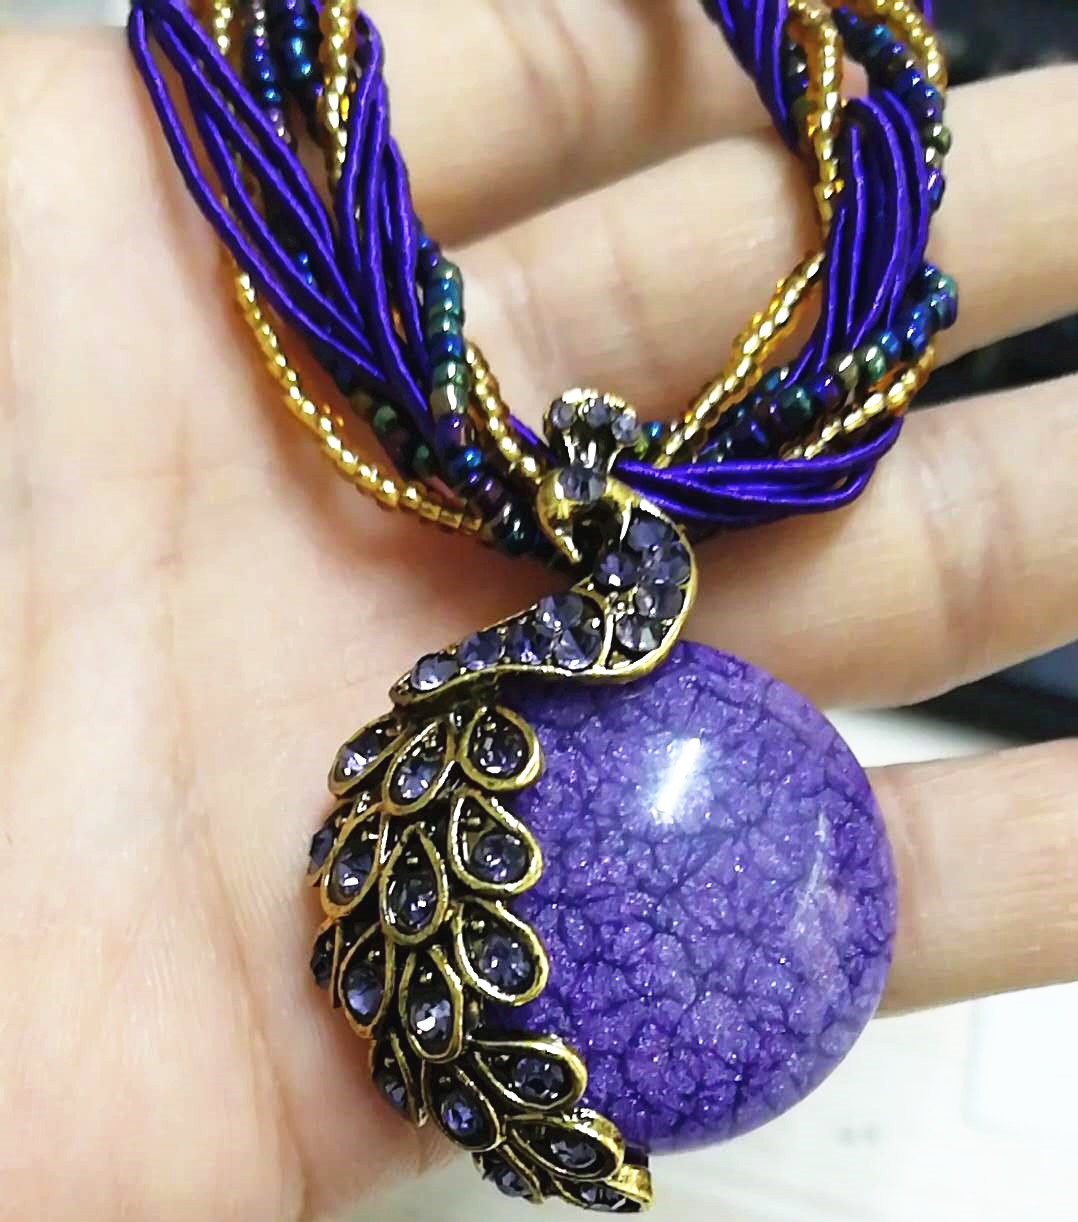 Wholesale Bohemia Necklace Crack Peacock Pendant Multilayer Colorful Natural Stone Beads Chain Vintage Necklace Jewelry Fashion For Women VGN056 9